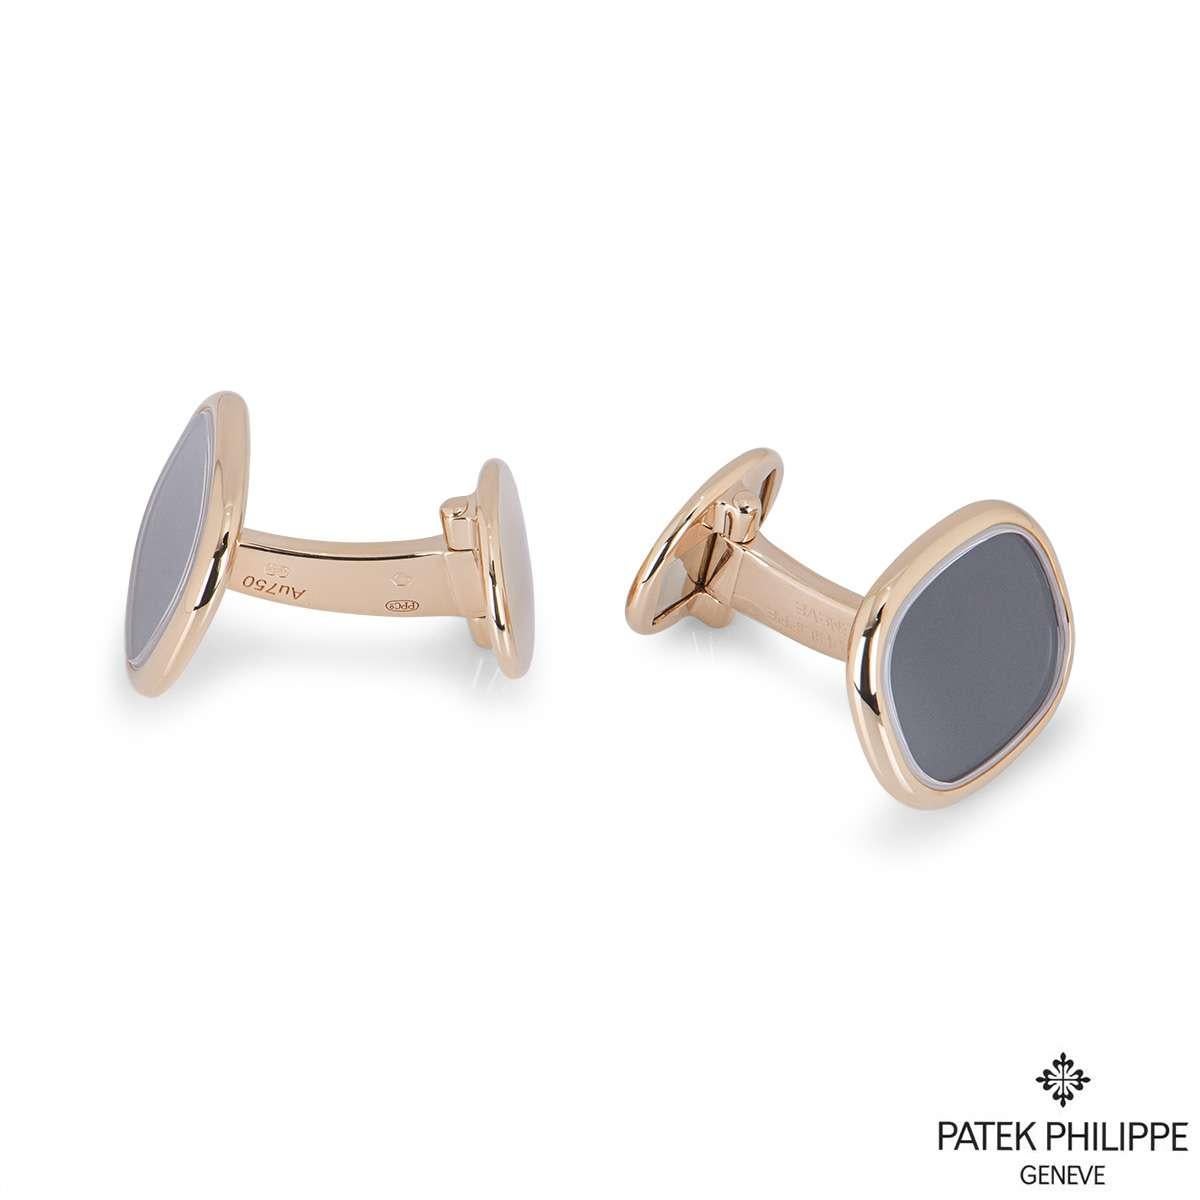 Patek Philippe Rose Gold Ellipse Cufflinks 205.9102R5-010 In Excellent Condition For Sale In London, GB